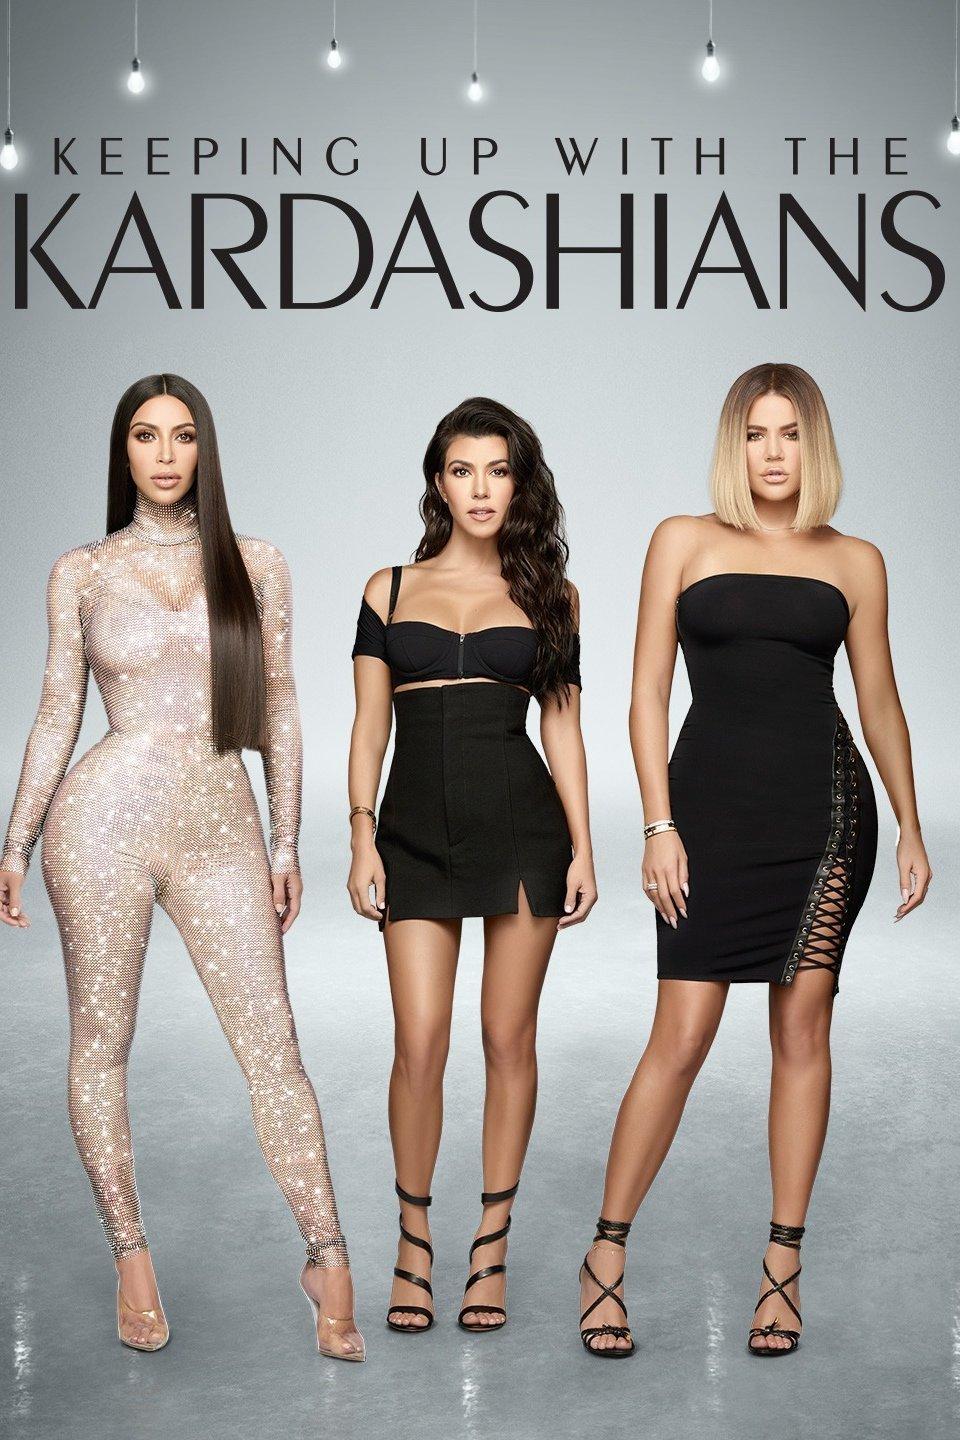 Keeping Up with the Kardashians (TV Series 2007– )